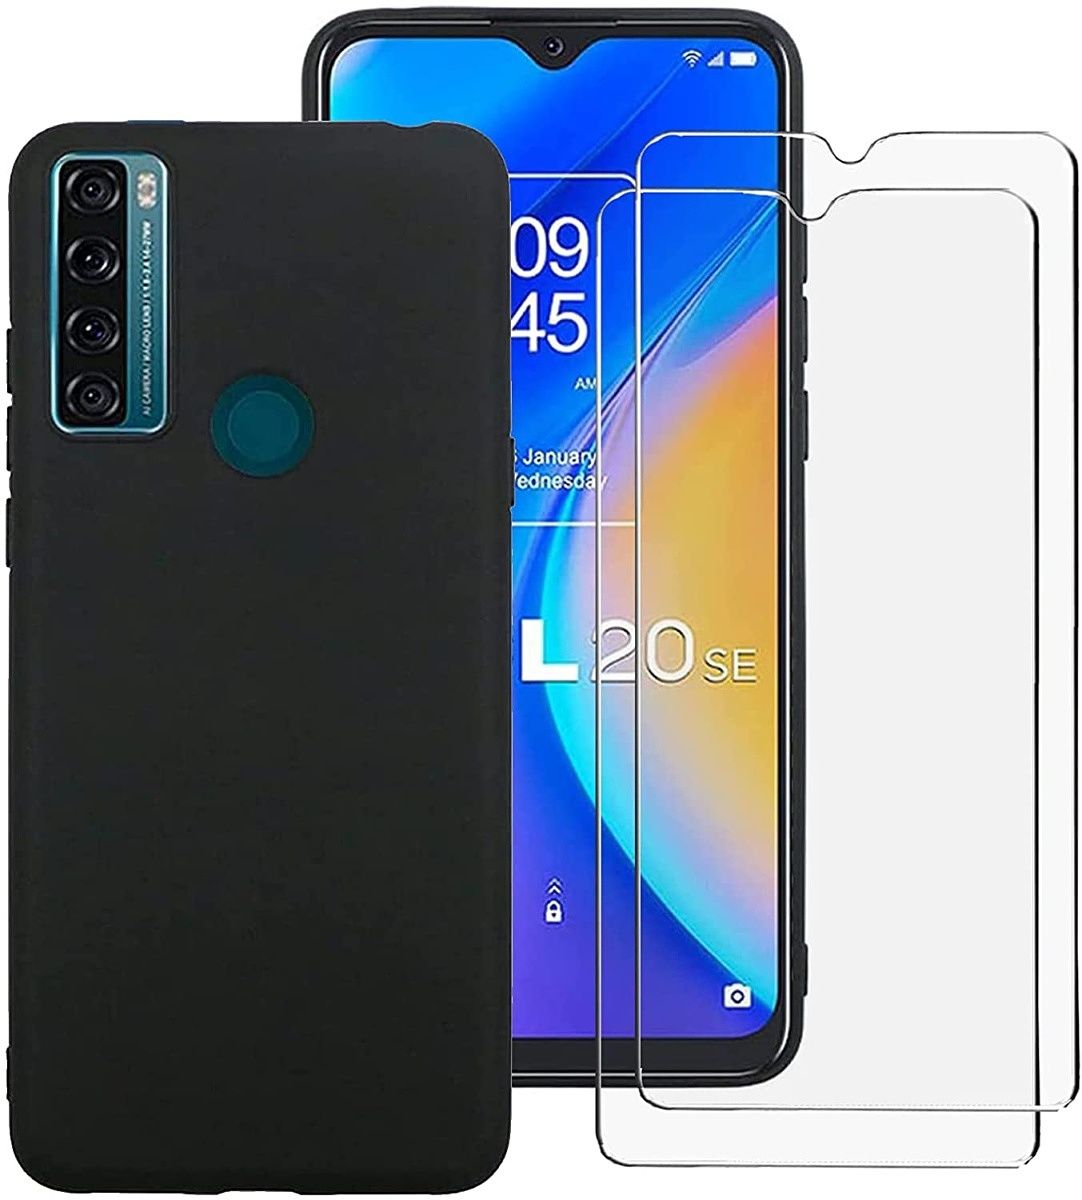 The Flyme case for the TCL 20 SE is slim and lightweight, thanks to the TPU material used in its construction. Still, it provides a good level of protection to your smartphone. The case also comes bundled with two screen protectors, so you can also safeguard your screen.